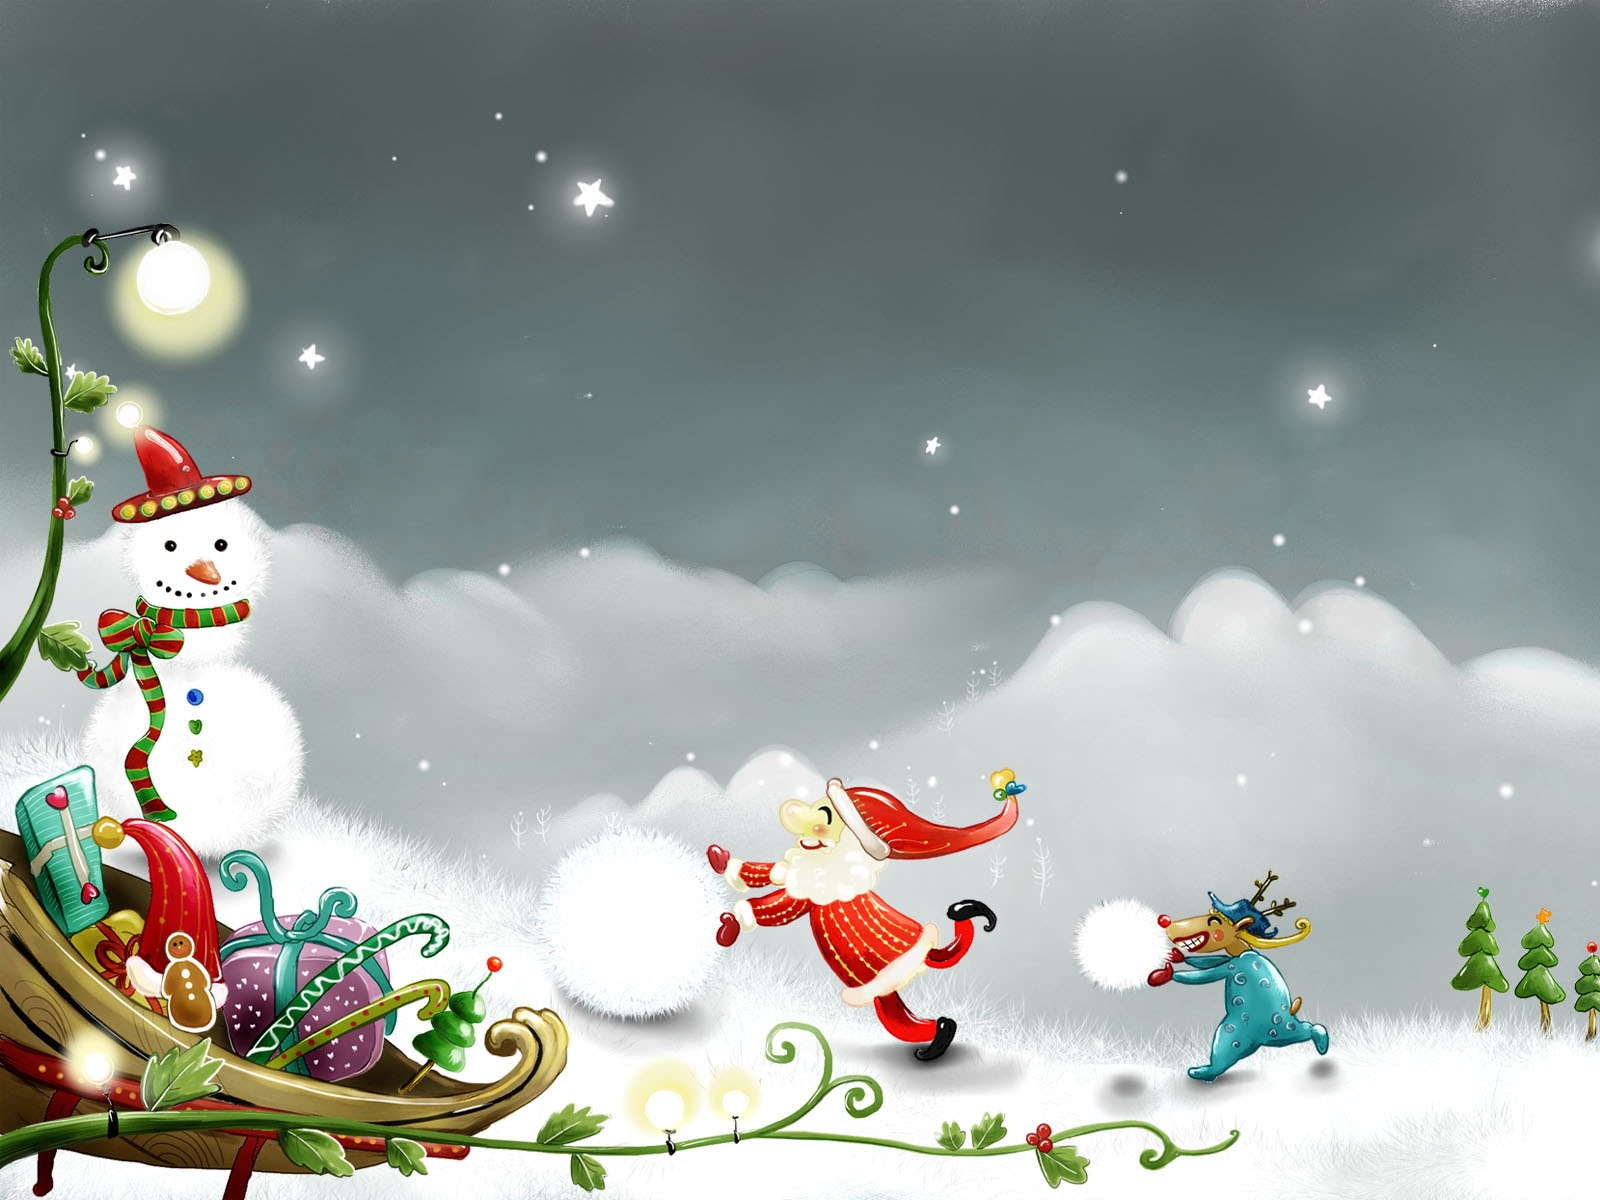 Snowman and Santa Claus for 1600 x 1200 resolution